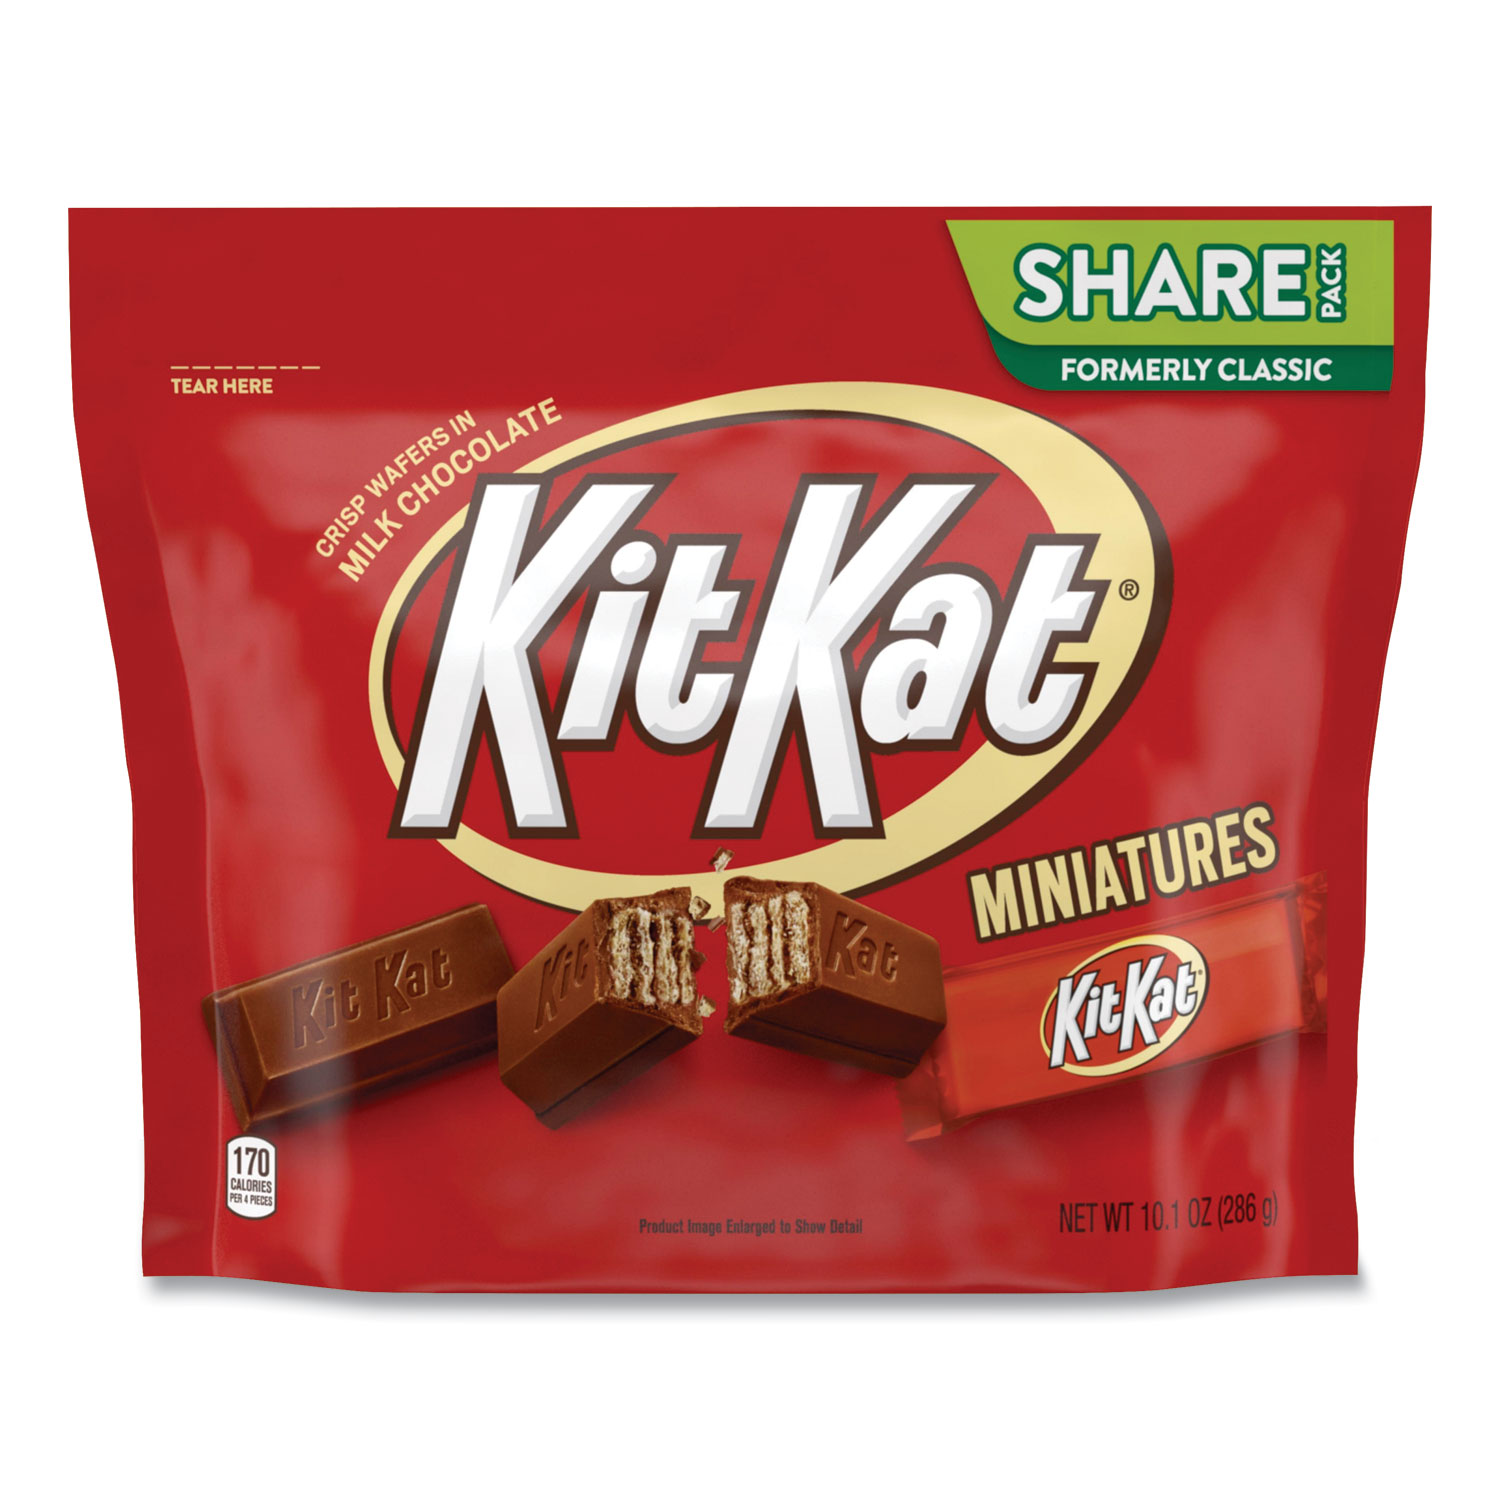  Kit Kat 22670 Miniatures Milk Chocolate Share Pack, 10.1 oz Bag, 3/Pack, Free Delivery in 1-4 Business Days (GRR24600425) 